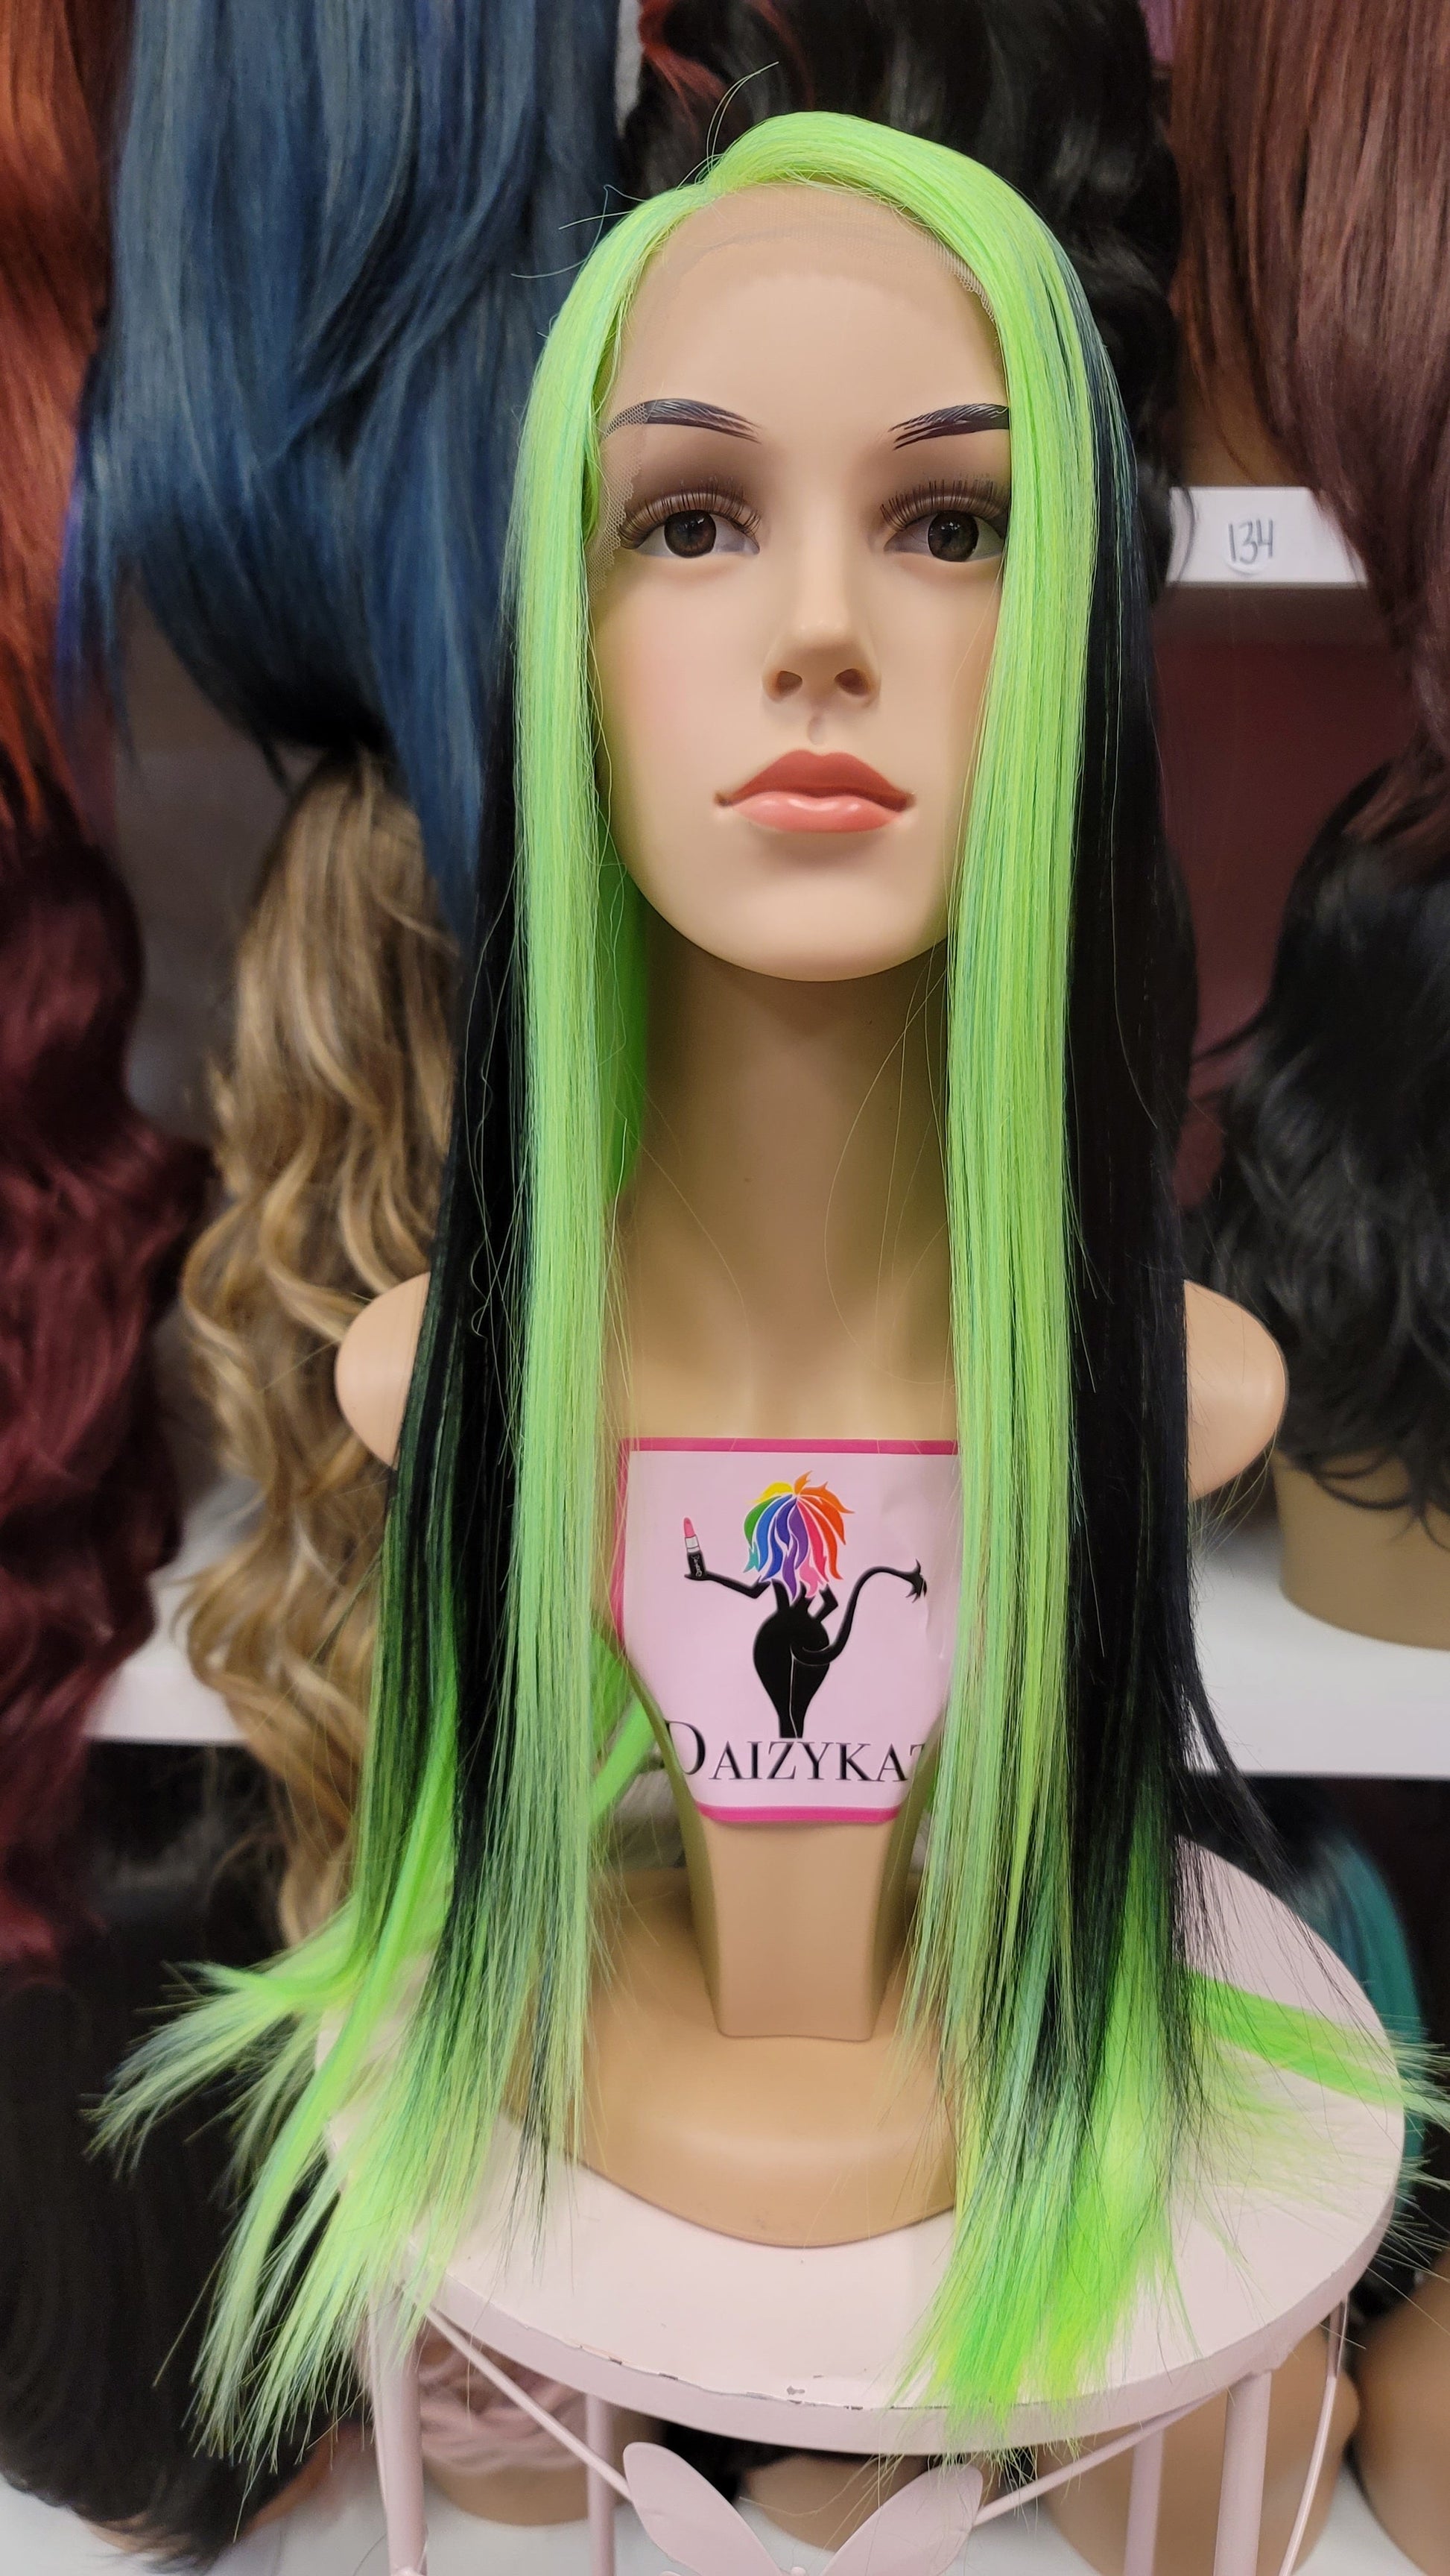 444 CASSIE - Left Part Lace Front Wig - 1B/GREEN - DaizyKat Cosmetics 444 CASSIE - Left Part Lace Front Wig - 1B/GREEN DaizyKat Cosmetics Wigs